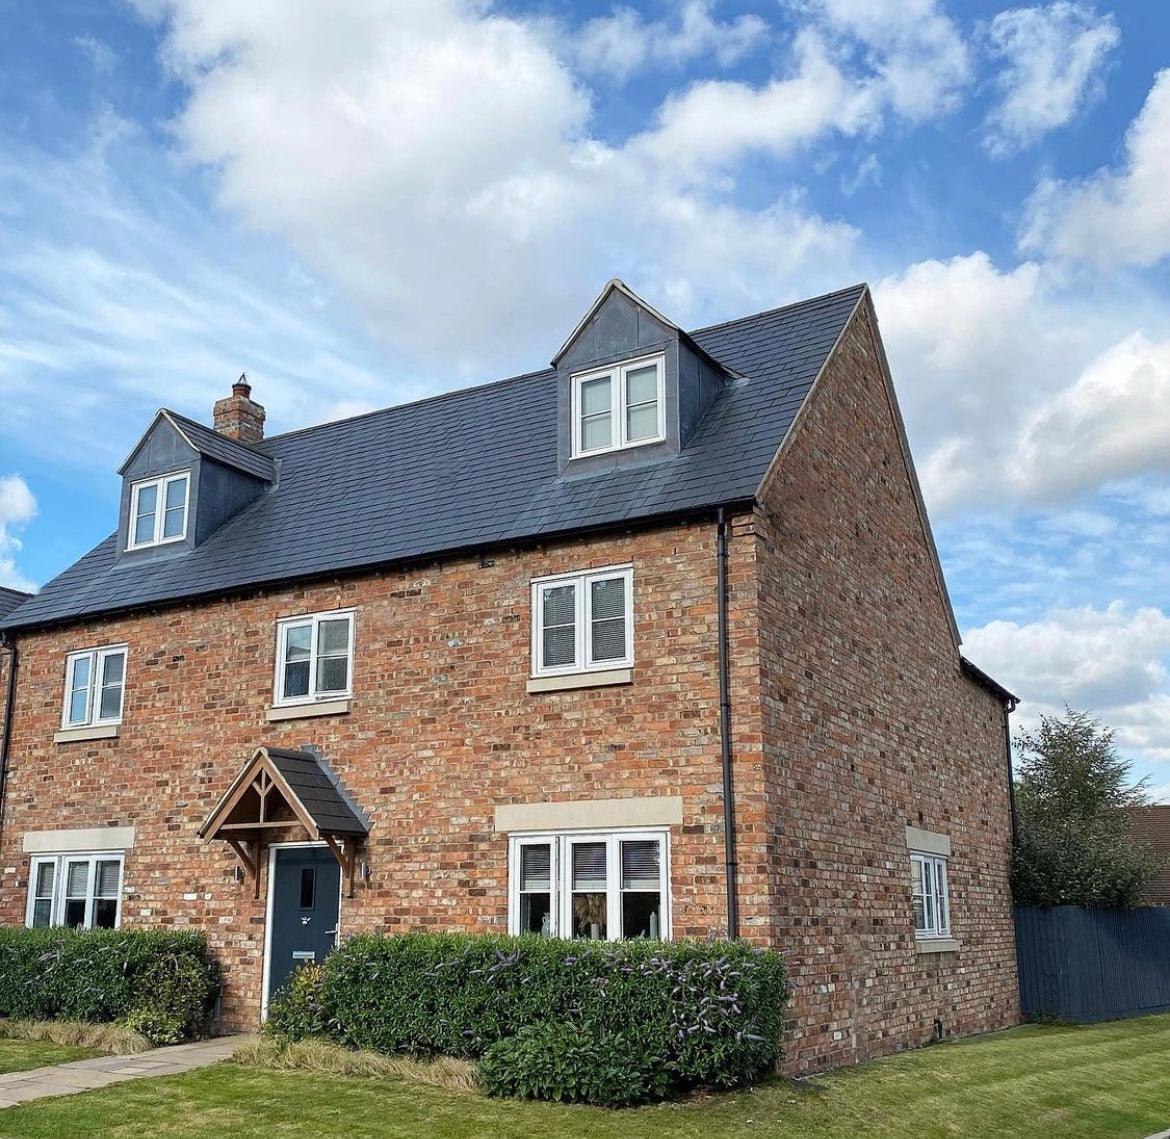 New Build Home Built with Reclaimed Wirecut Bricks - Cirencester, England - Reclaimed Brick Company